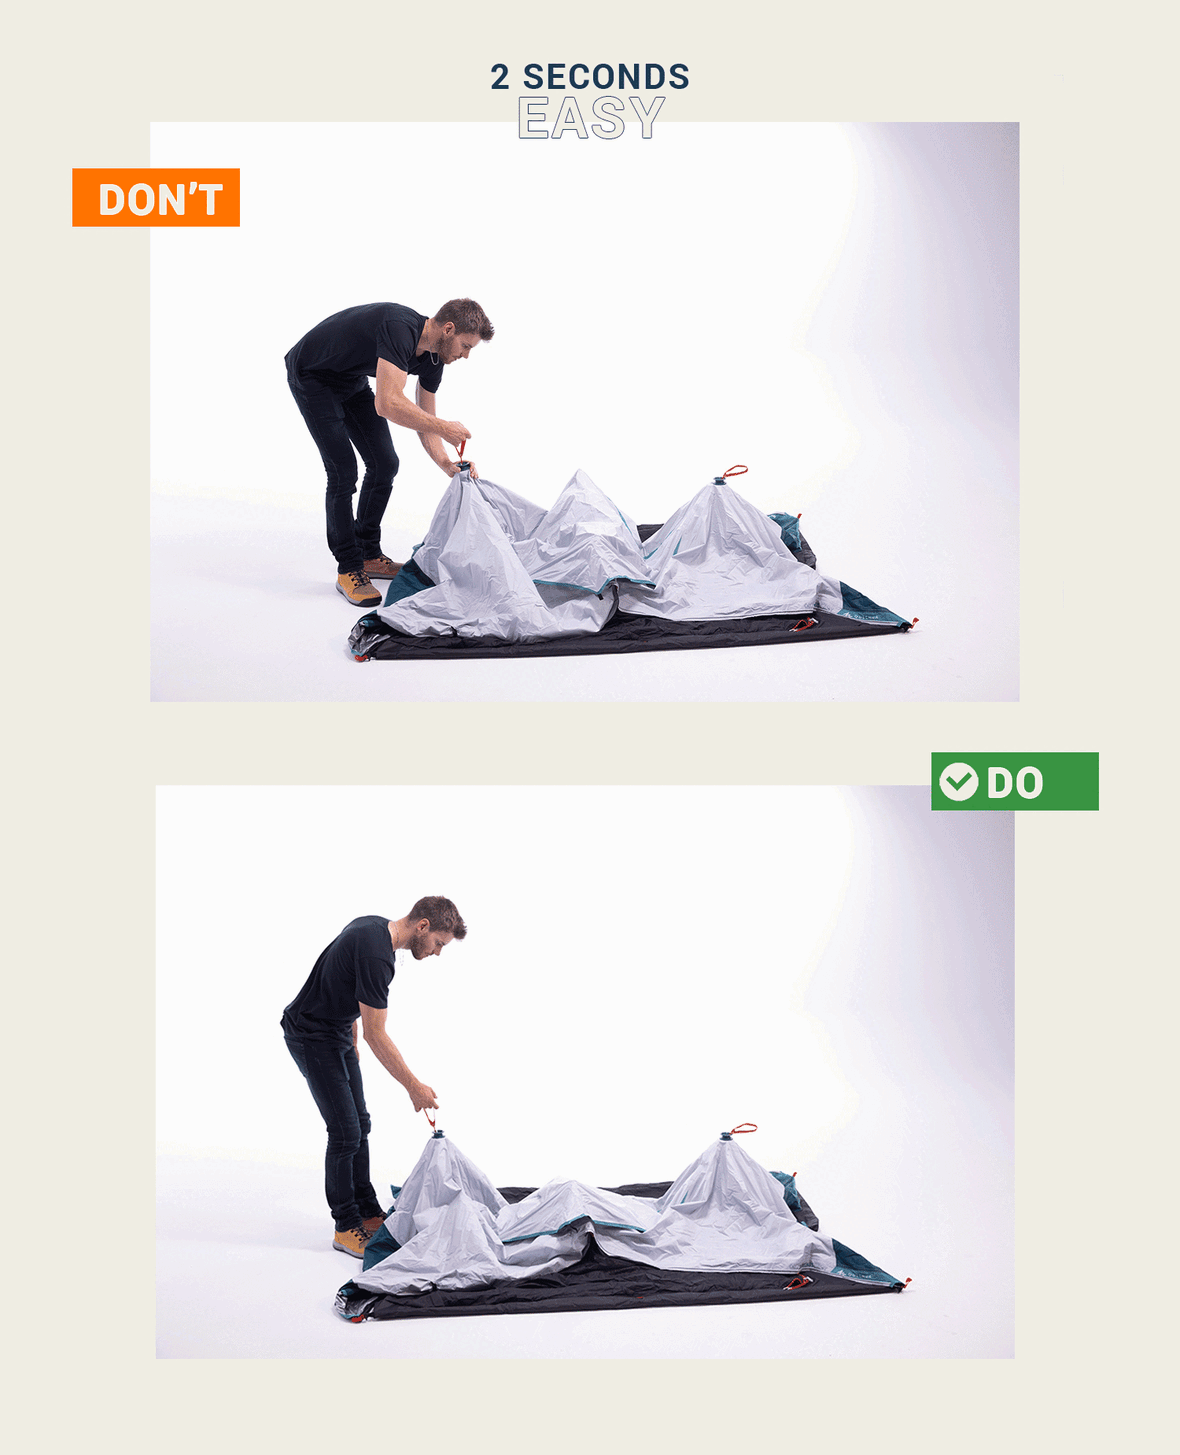 How to set up and fold down my 2 Seconds EASY tent 